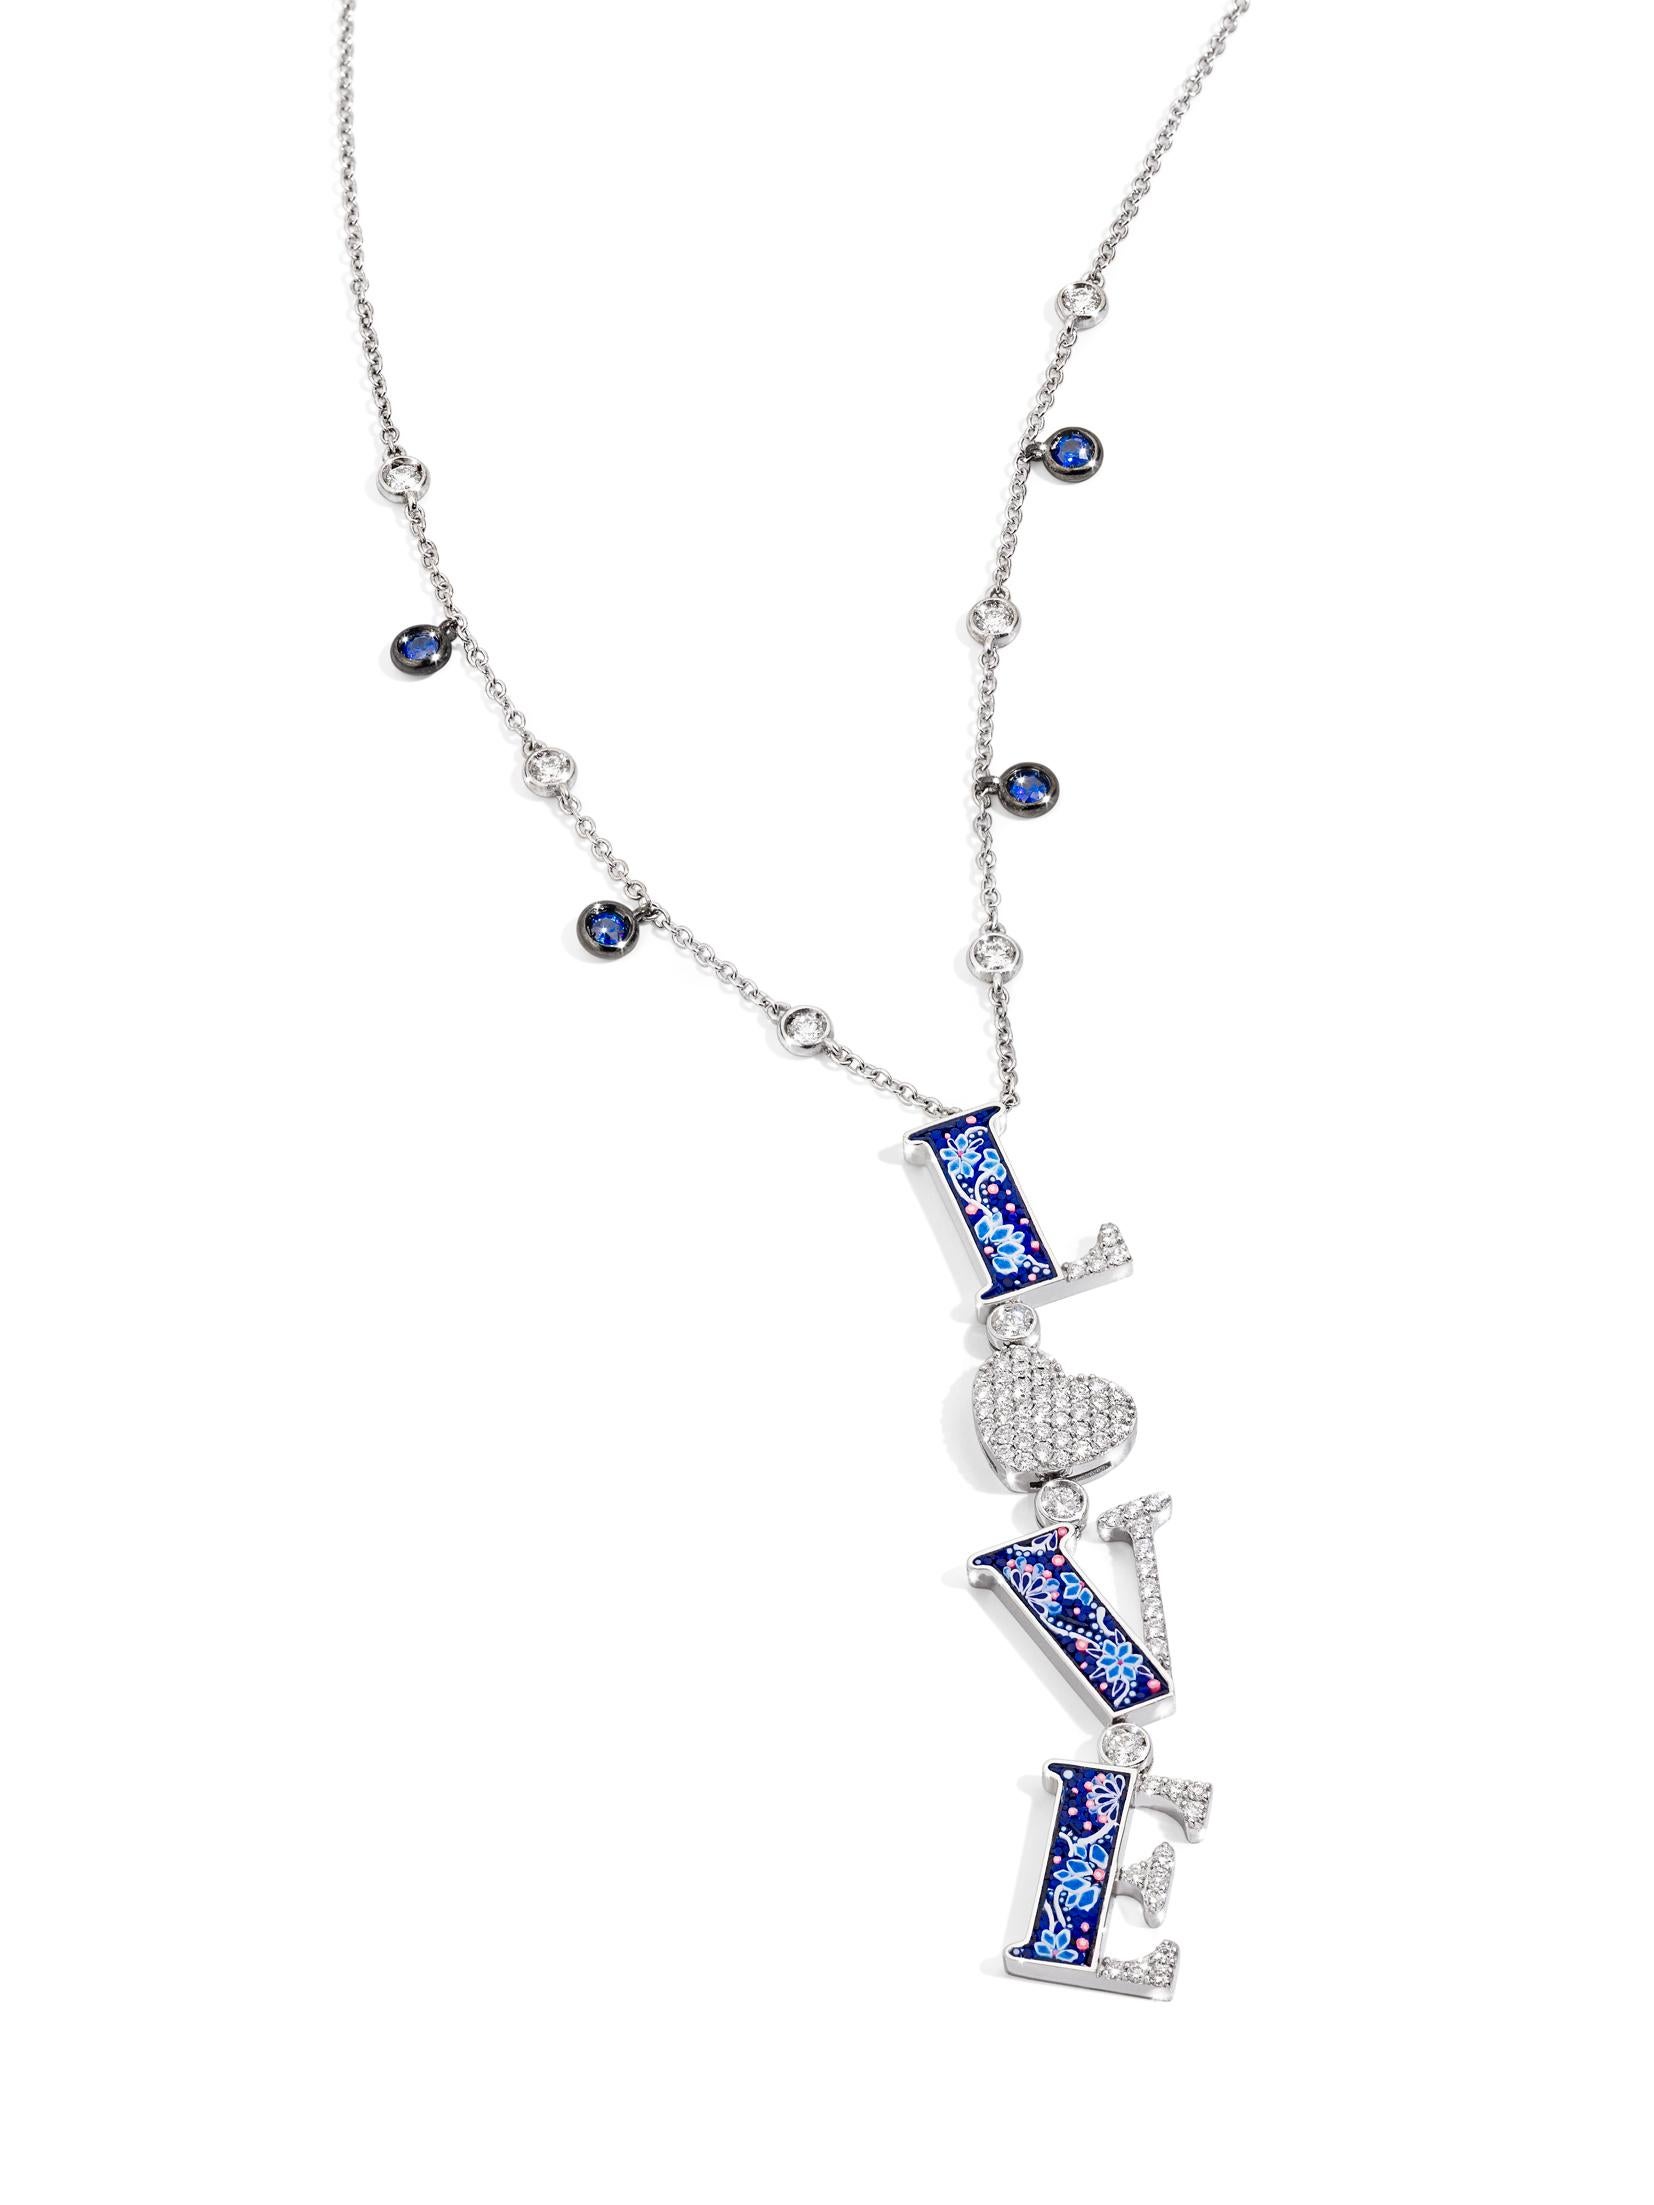 Modern Love Necklace White Diamonds White Gold Blues Sapphires Decorated Micromosaic For Sale